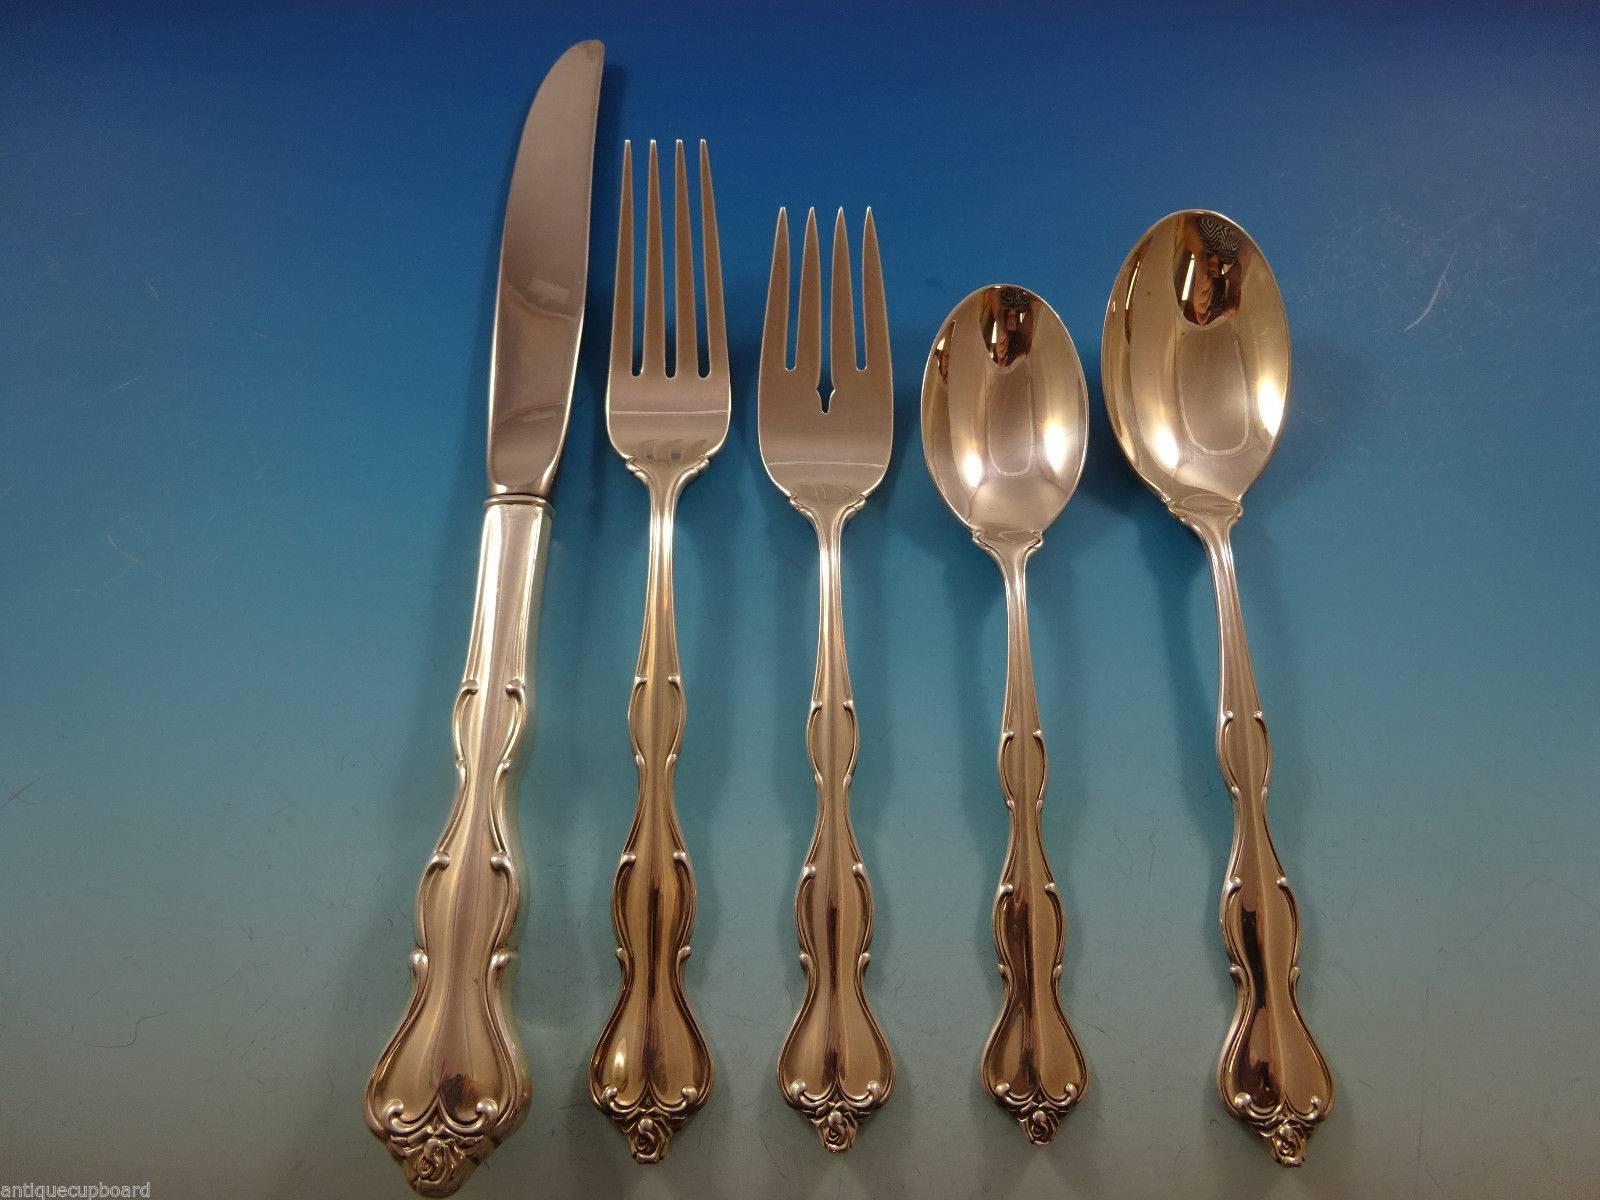 Since 1898, International Silver has been taking great pride in crafting high quality sterling silver flatware. Classic and incredibly versatile, this timeless design will complement any decorating style. Sterling flatware from International is a